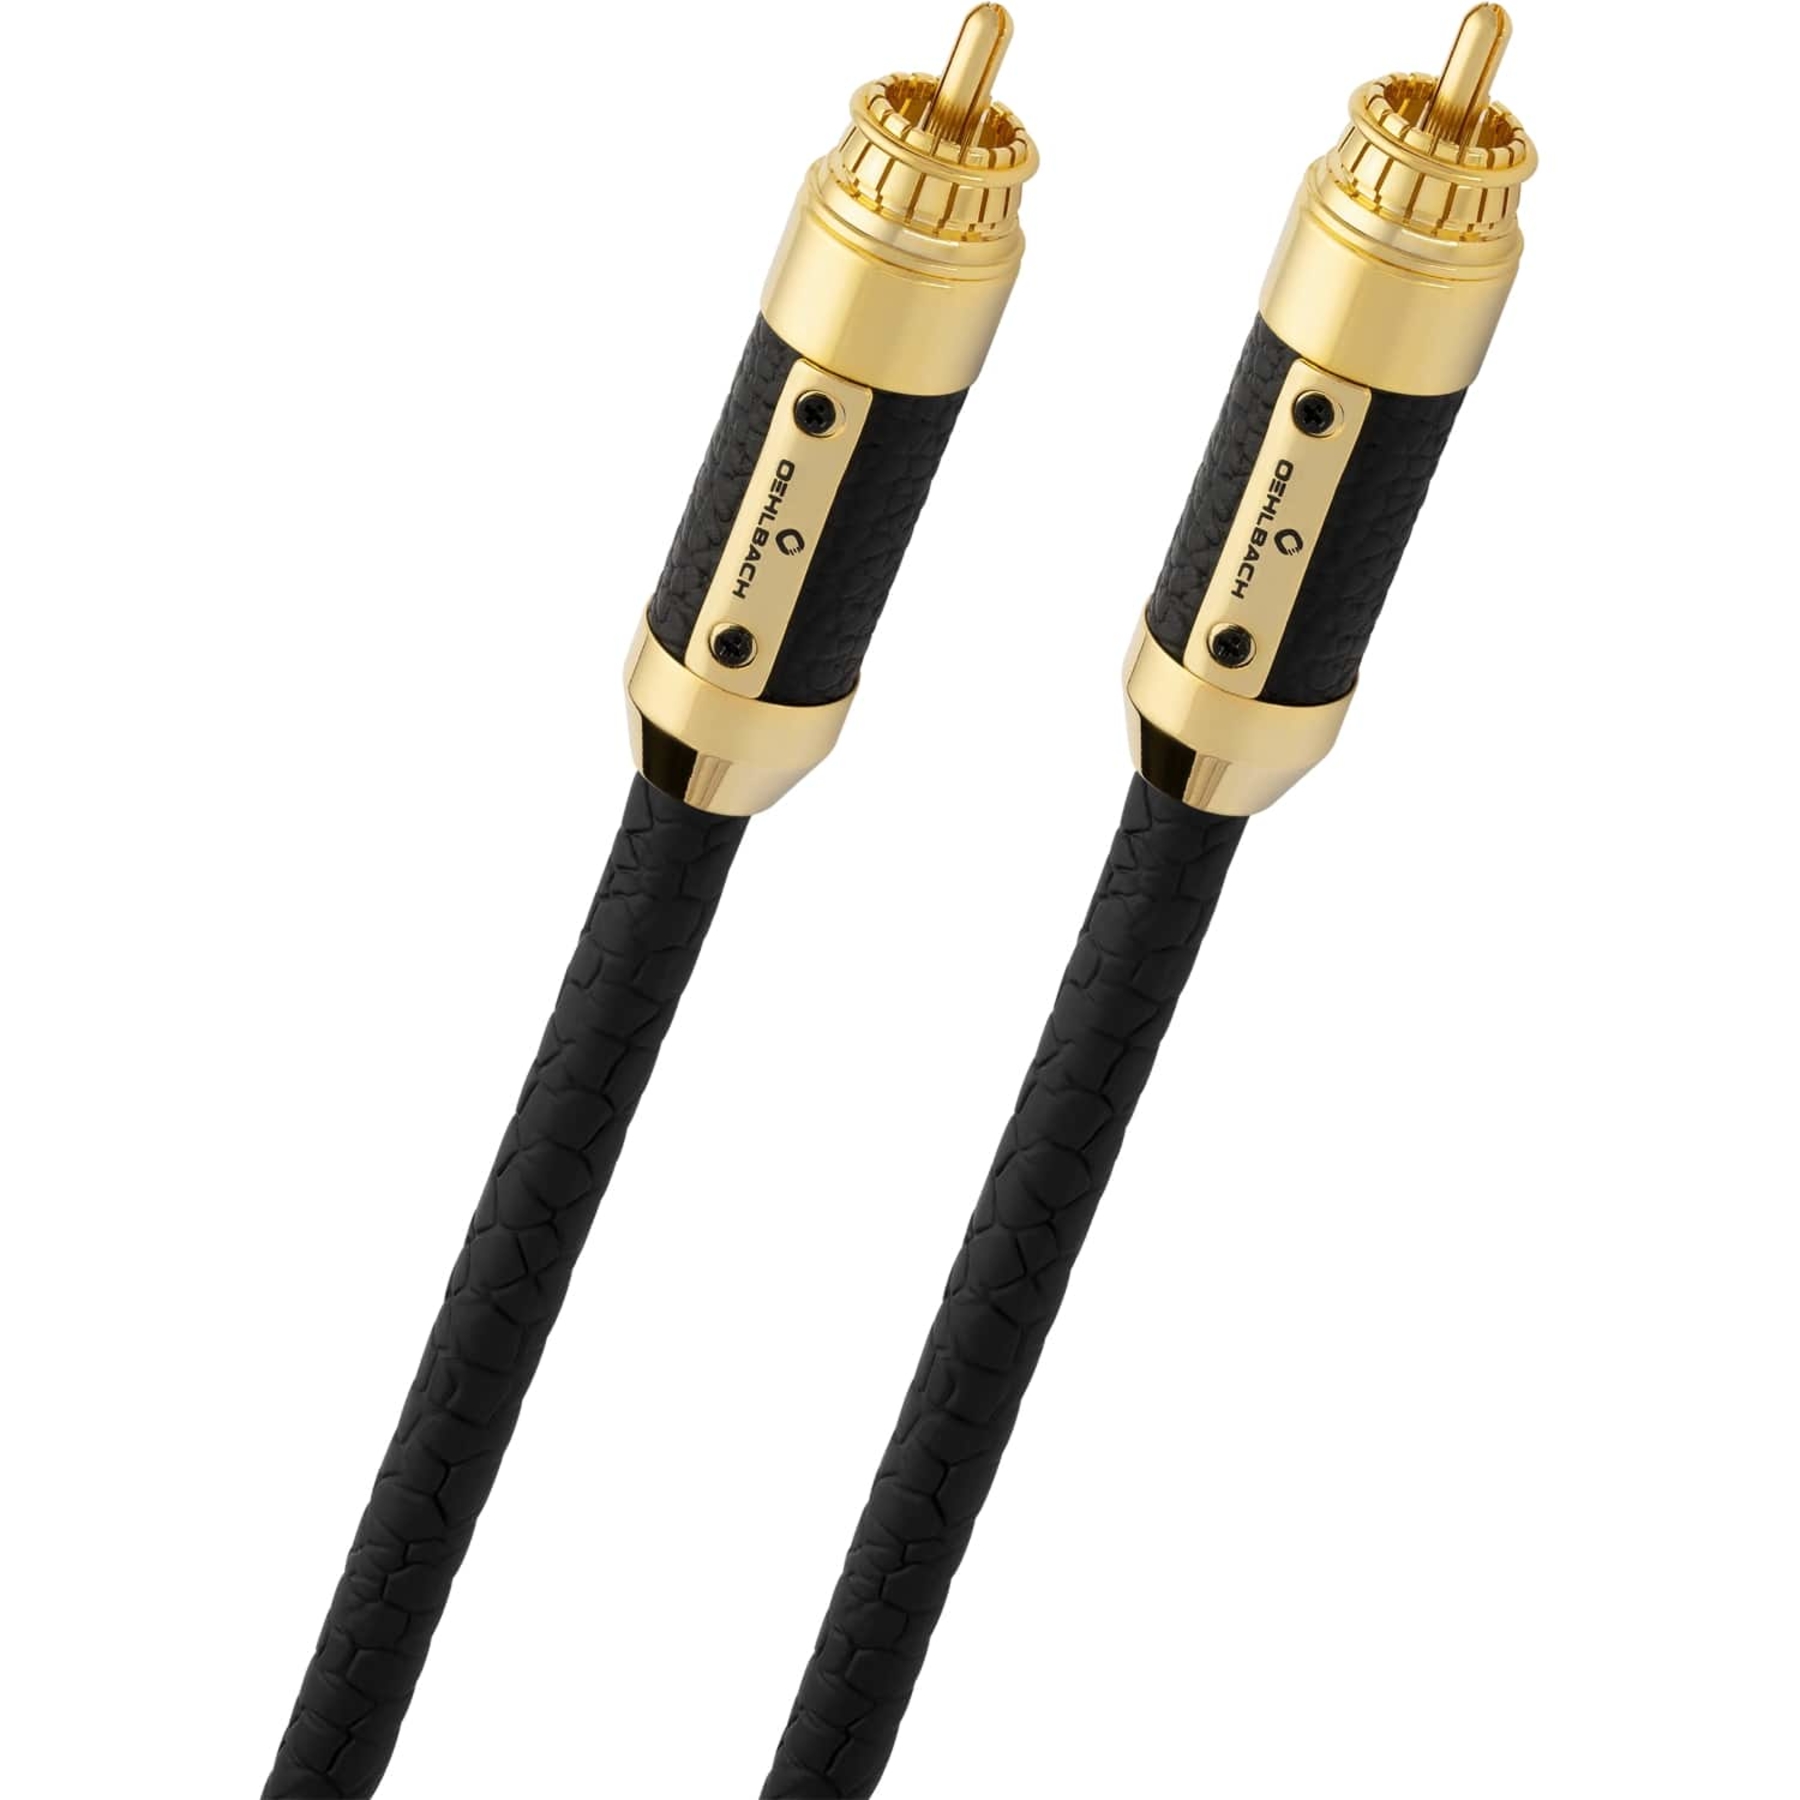 Кабели межблочные аудио Oehlbach STATE OF THE ART XXL Black Connection Cable RCA, 1x1,0m, gold, D1C13826 кабели акустические в нарезку oehlbach performance speaker cable 2x1 50mm2 clear 20m spool d1c105